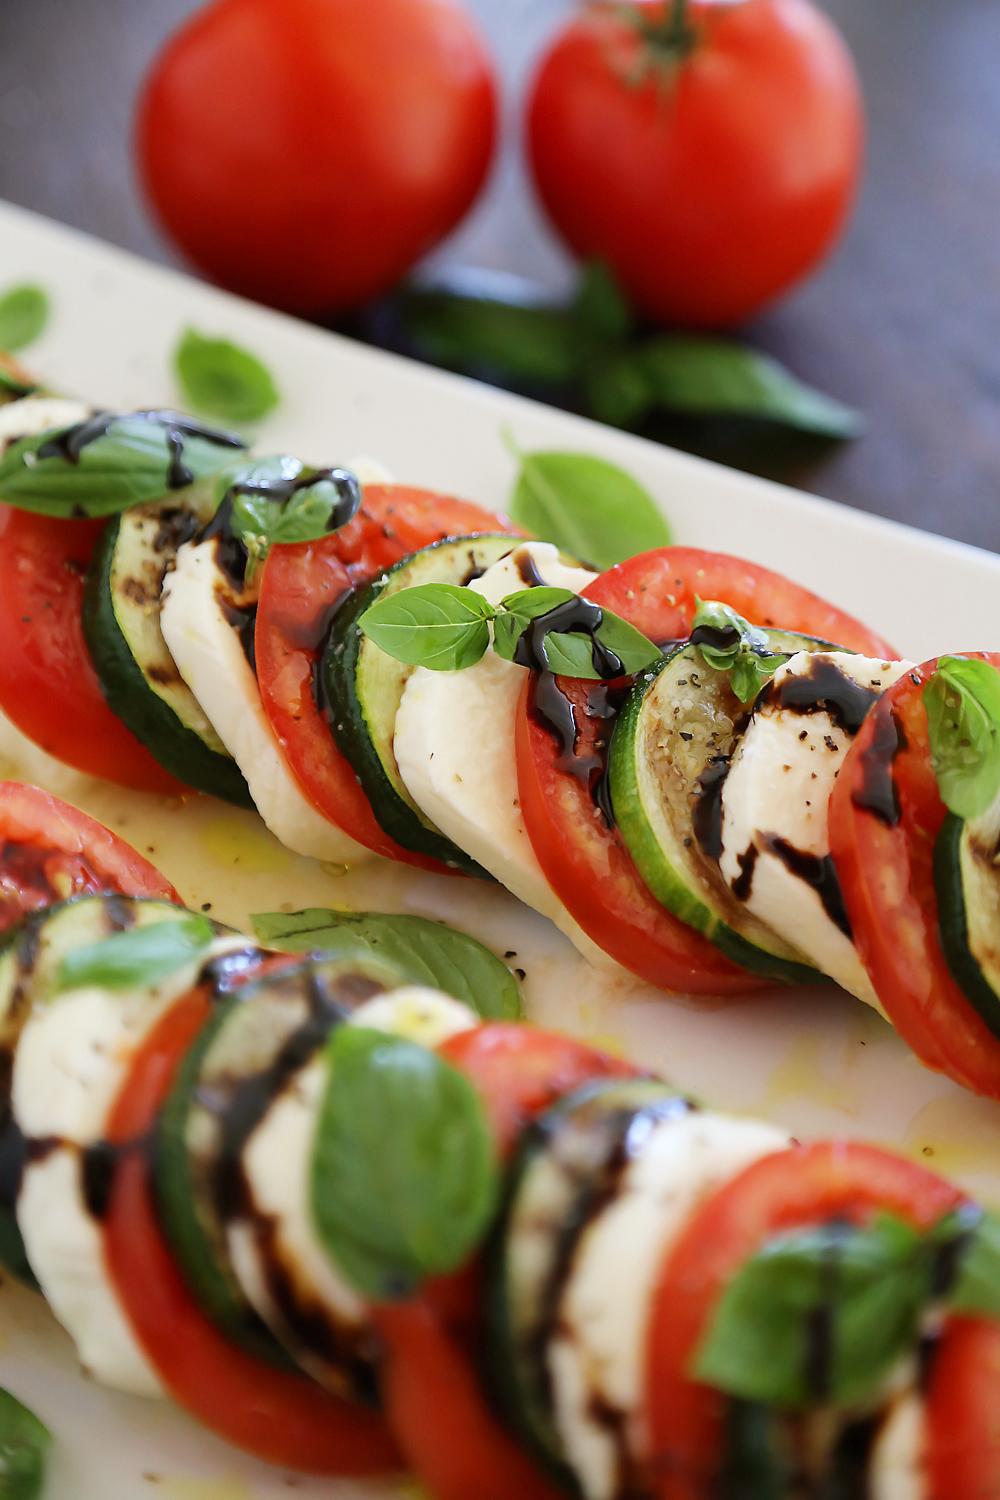 Grilled Zucchini Caprese Salad - Colorful, healthy, quick and easy. Serve alongside your favorite grilled meats and fish! Thecomfortofcooking.com